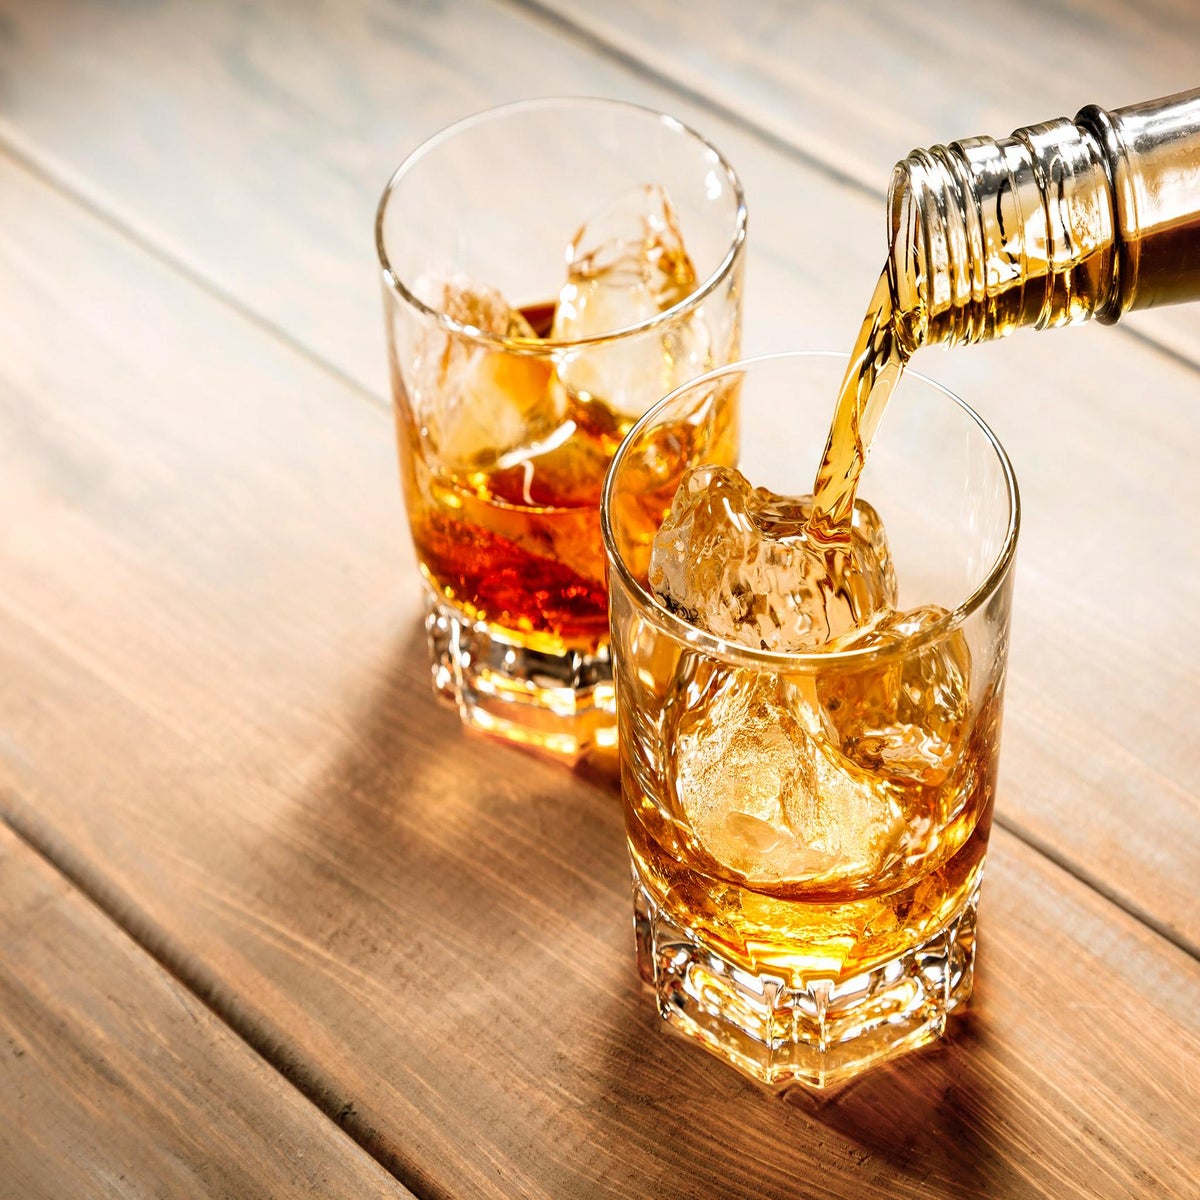 https://static.independent.co.uk/s3fs-public/thumbnails/image/2017/08/02/09/whisky-istock.jpg?width=1200&height=1200&fit=crop